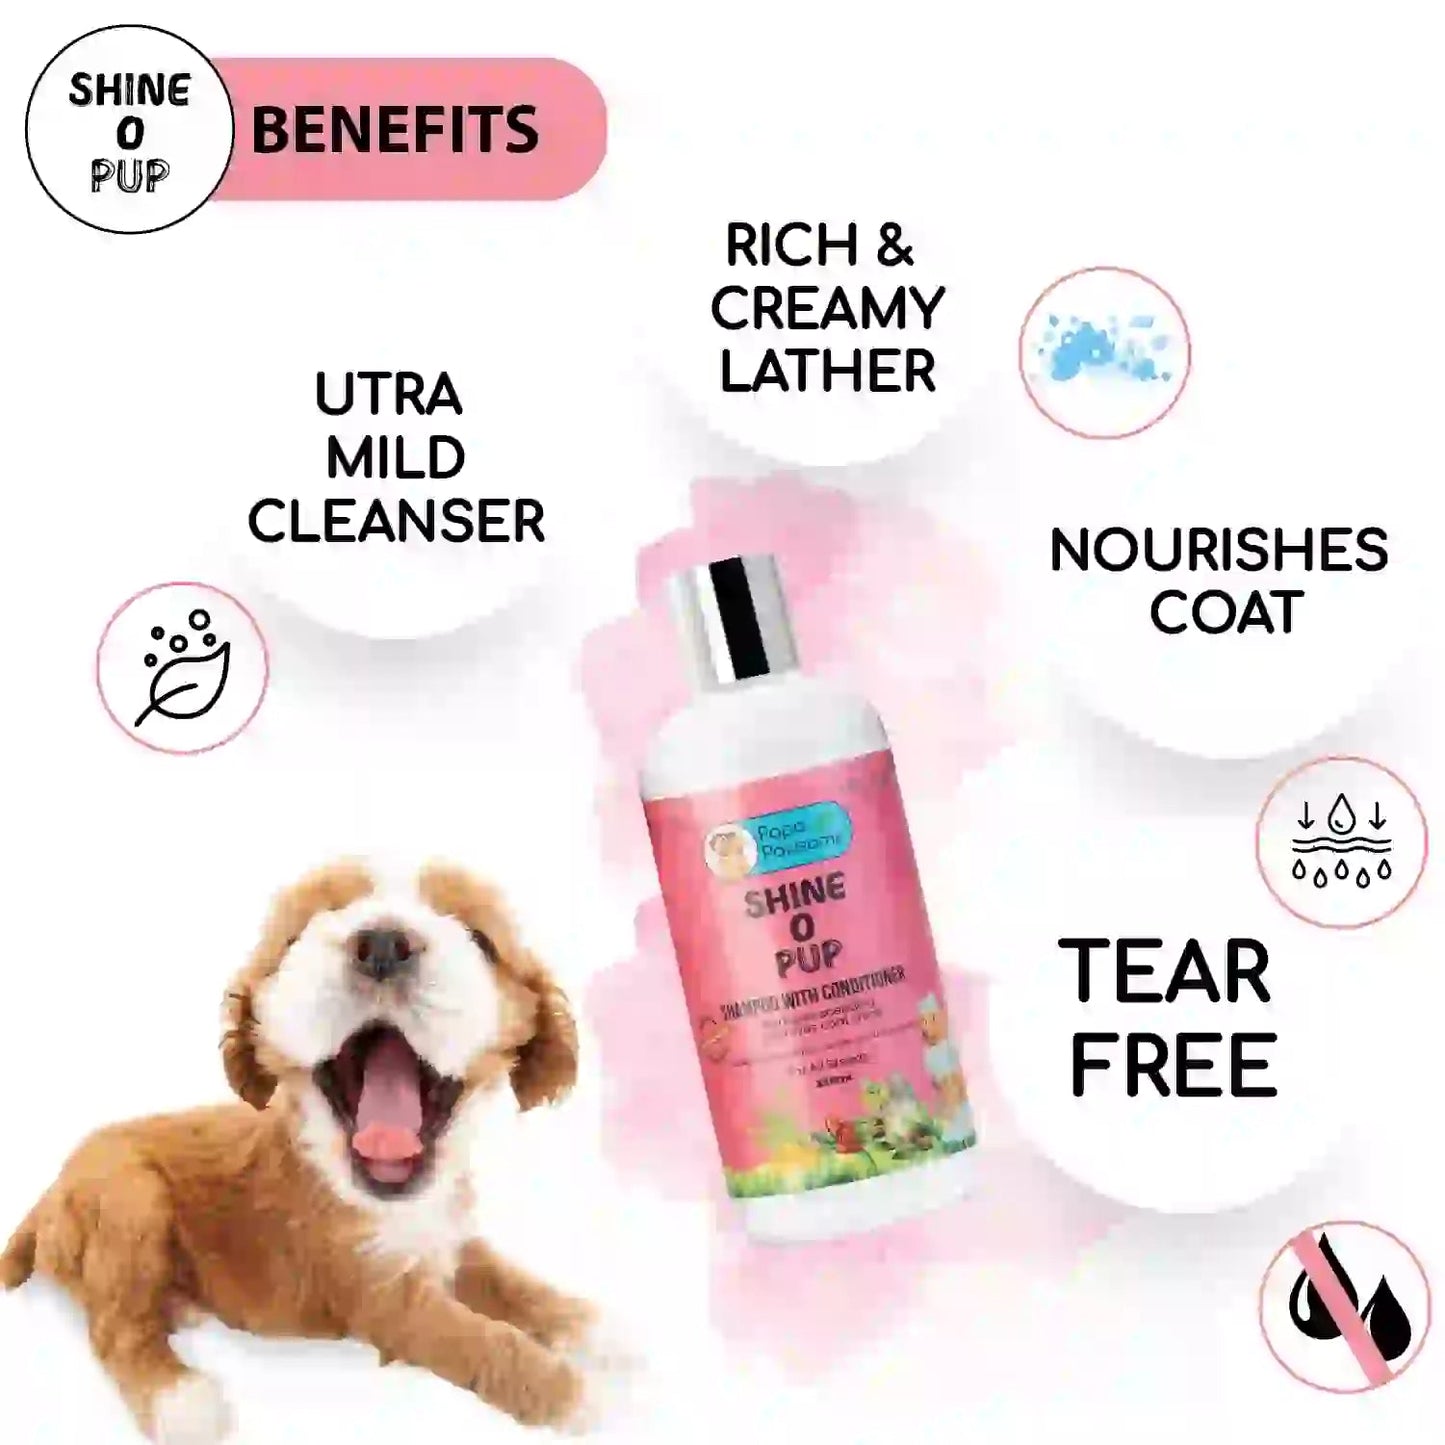 Benefits of this ultra-mild cleanser for puppies: Rich and creamy lather, nourishes the coat, tear-free formula